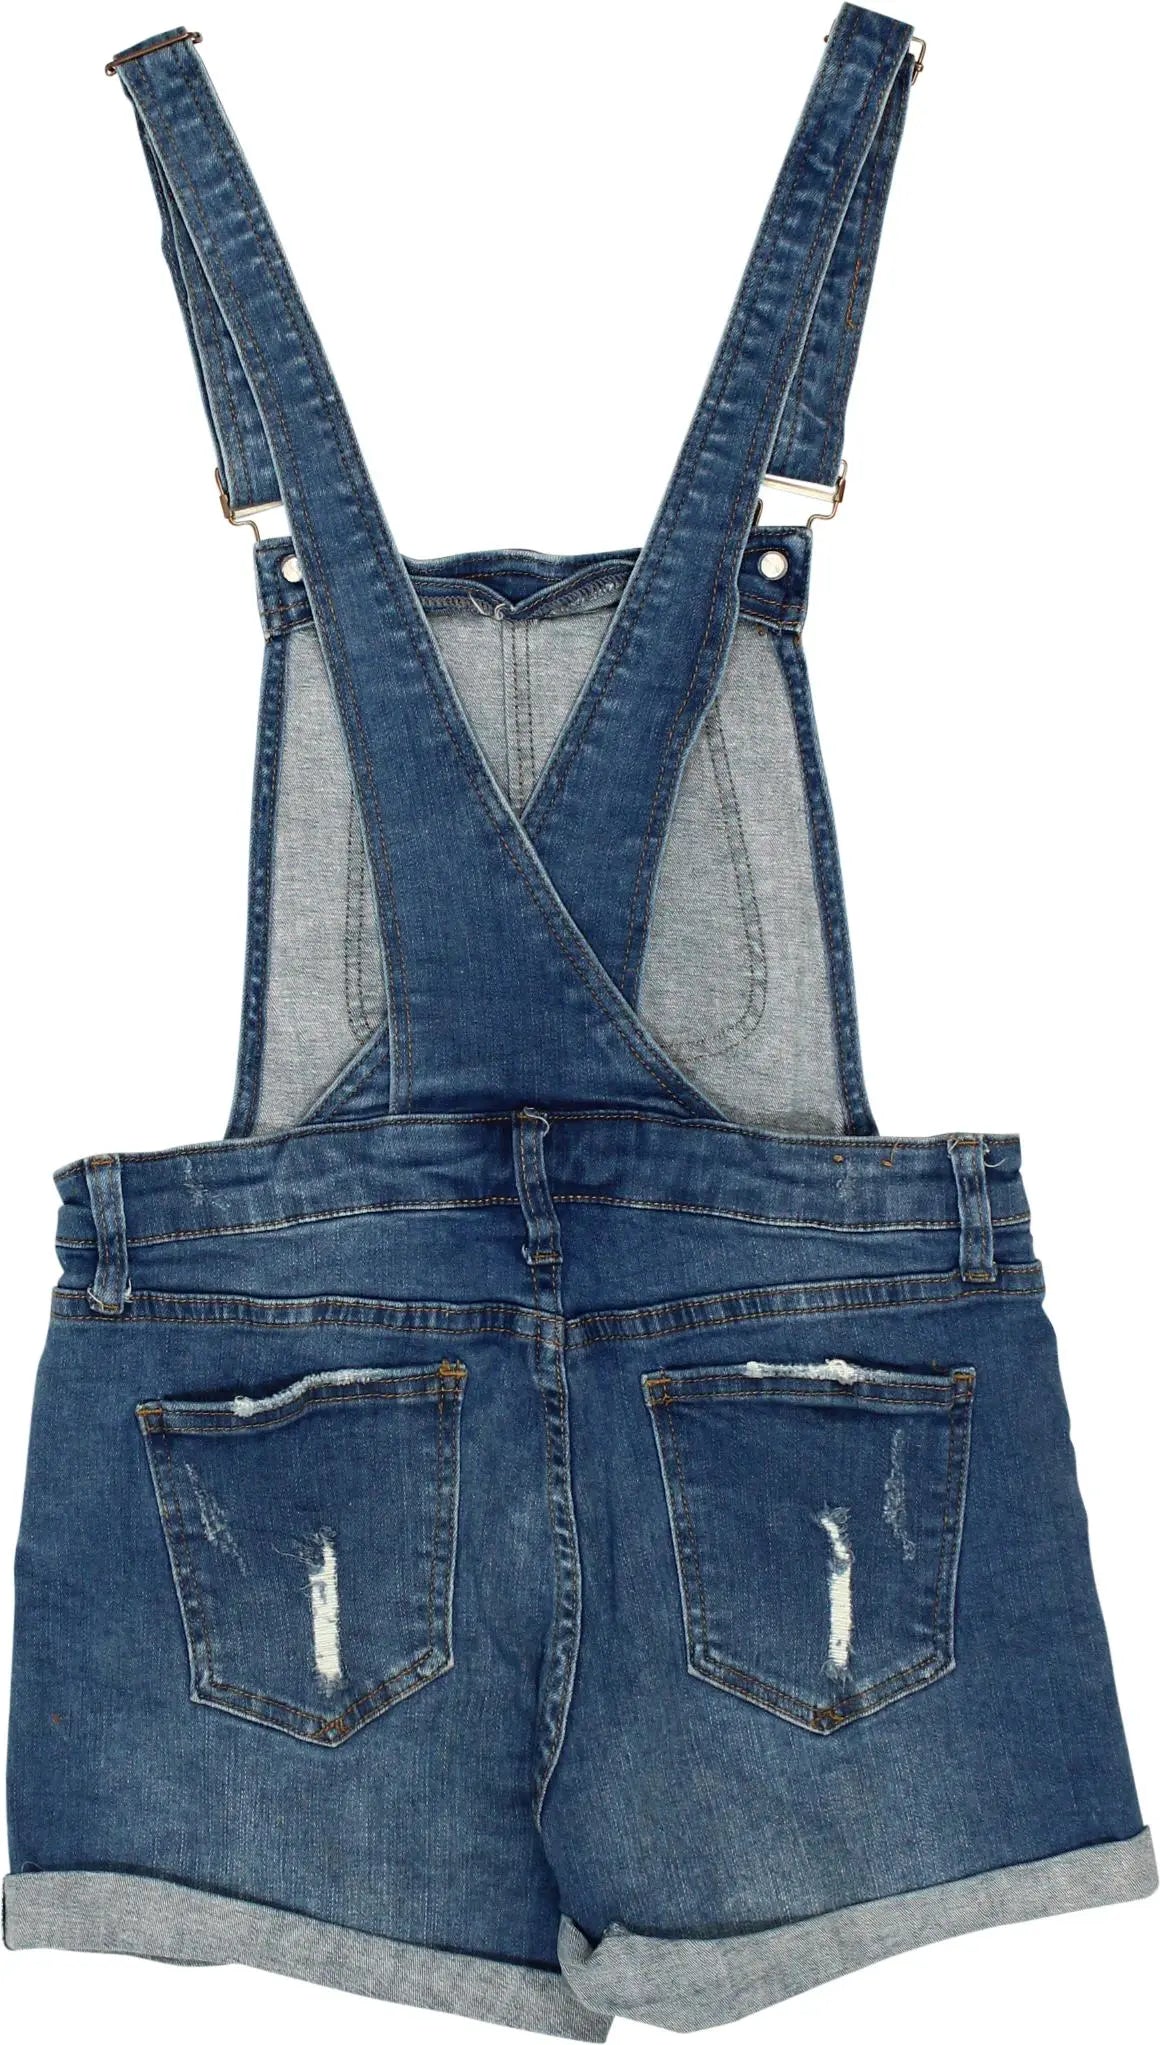 I & M Jeans - Short Denim Overall- ThriftTale.com - Vintage and second handclothing